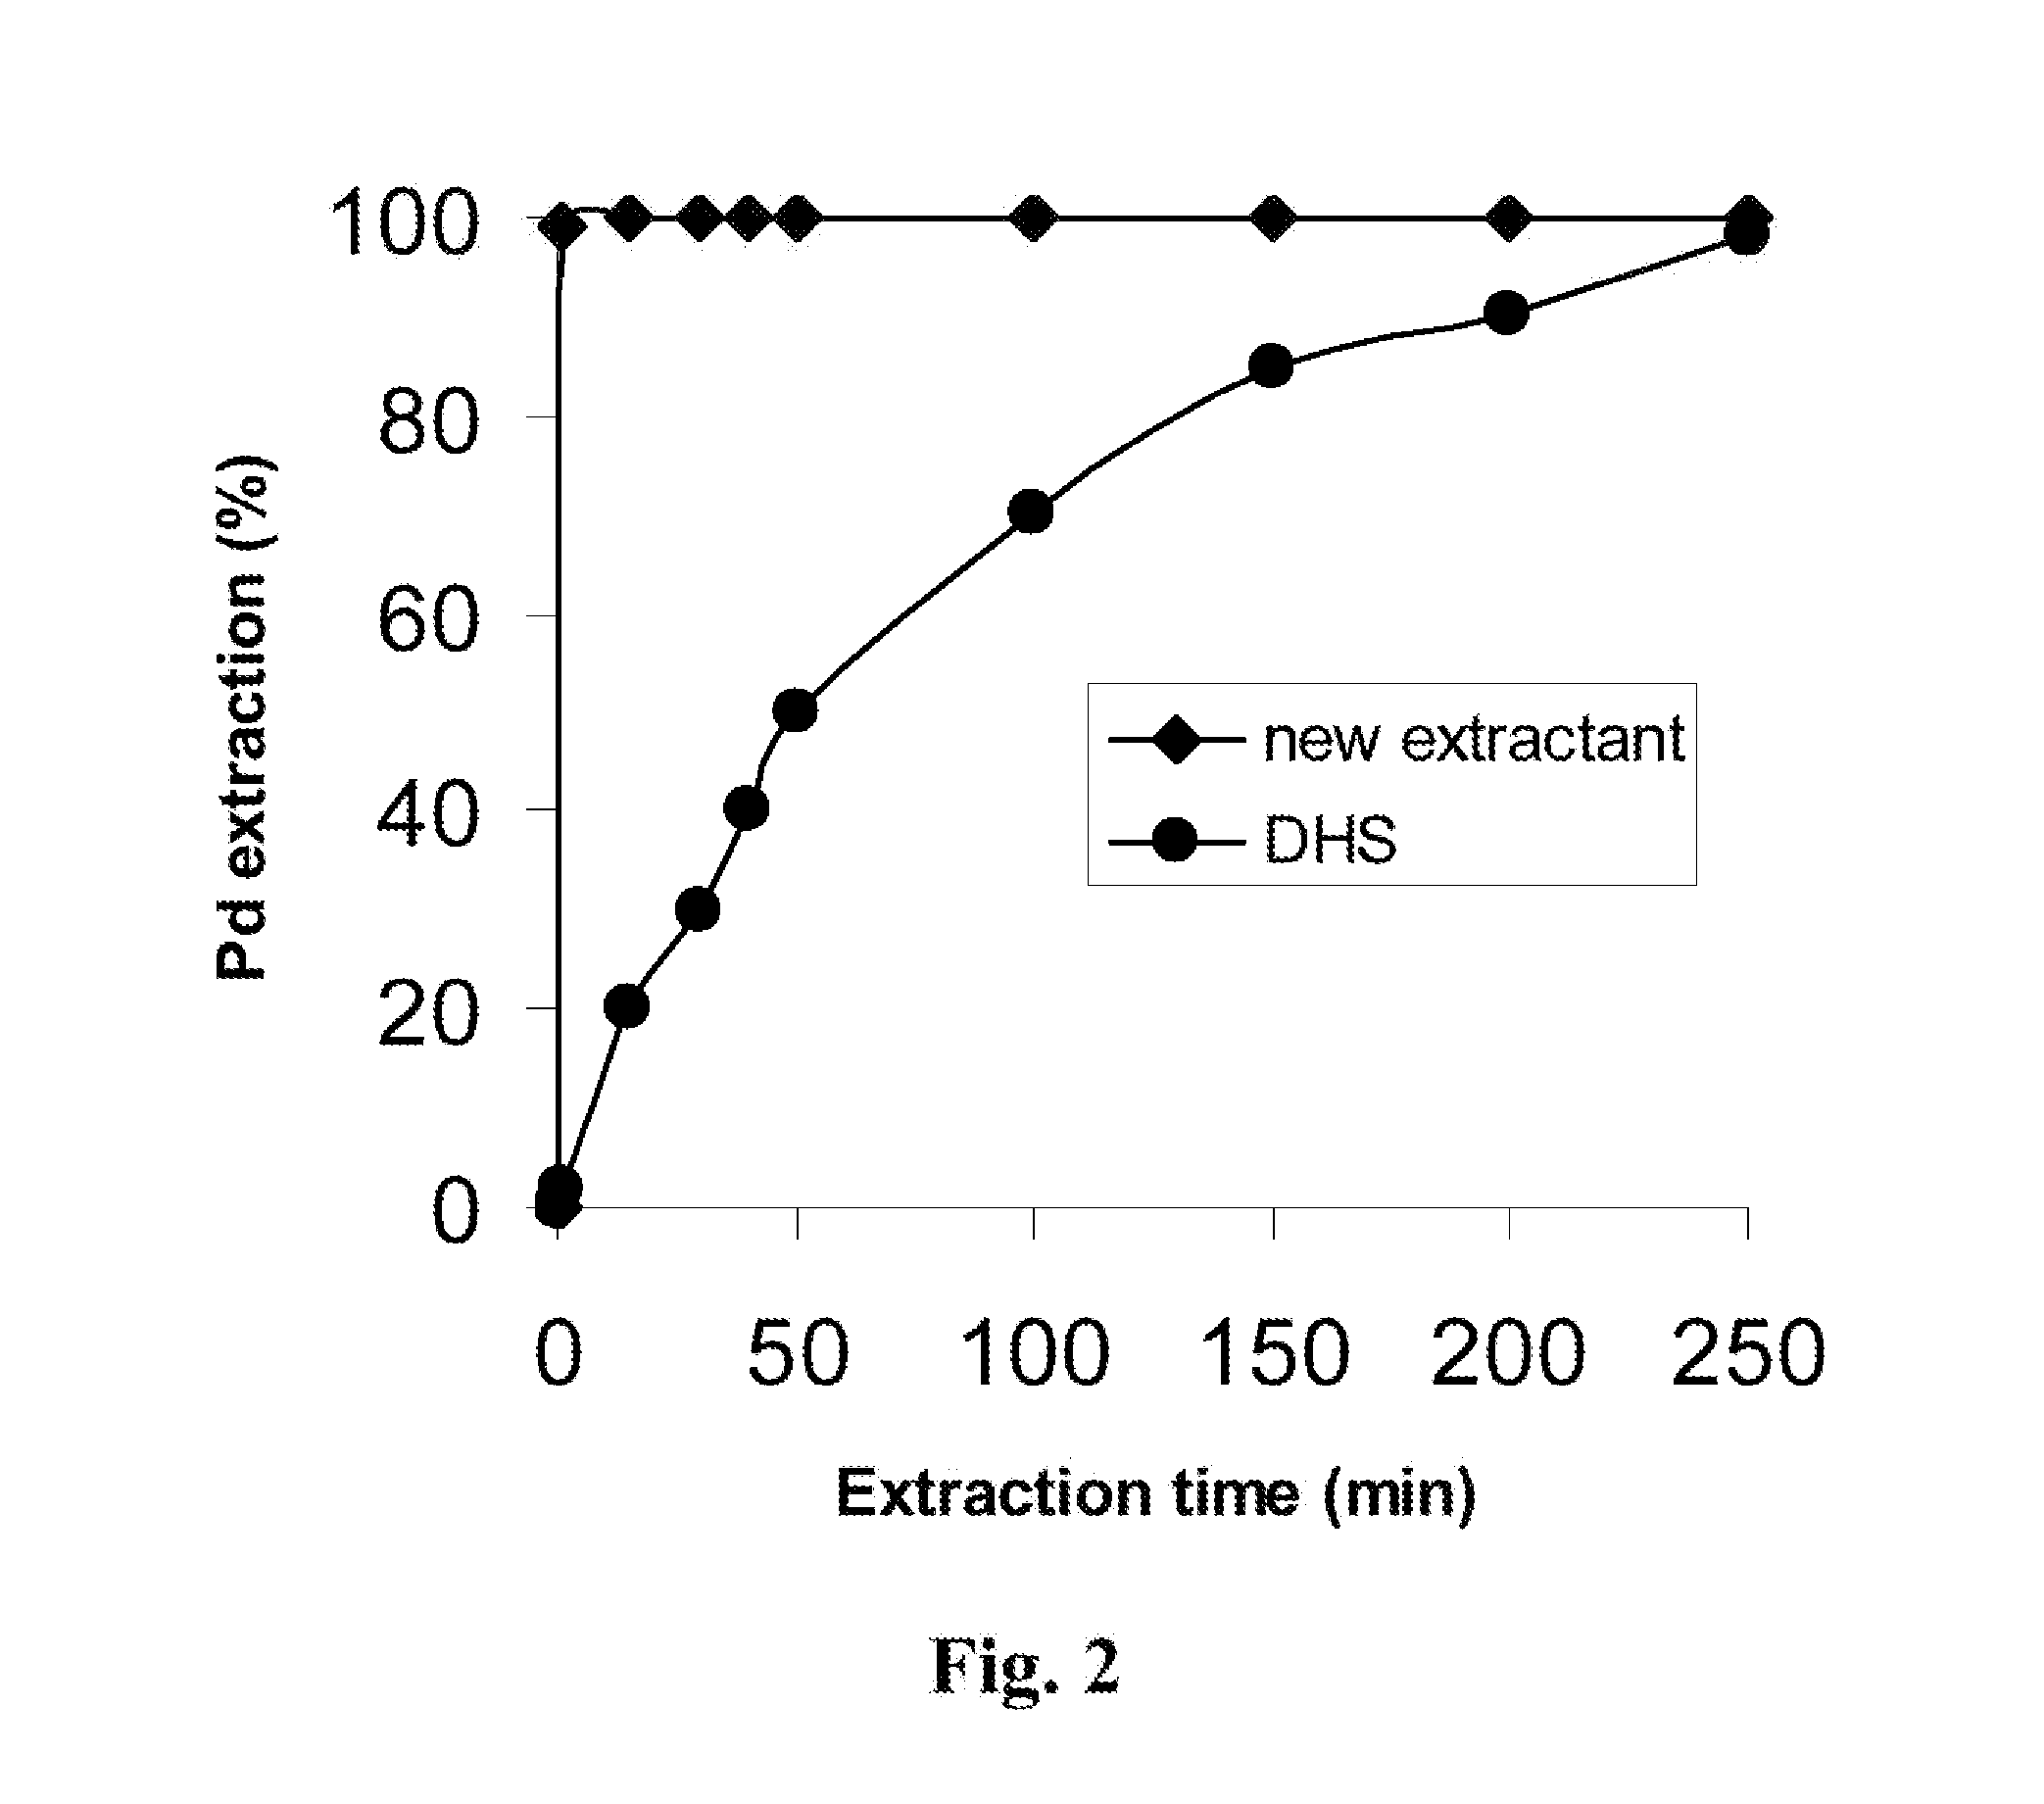 Method and Technique Employing a Novel Extractant to Enhance Recovery of Gold and Palladium from Hydrochloric Acid Media